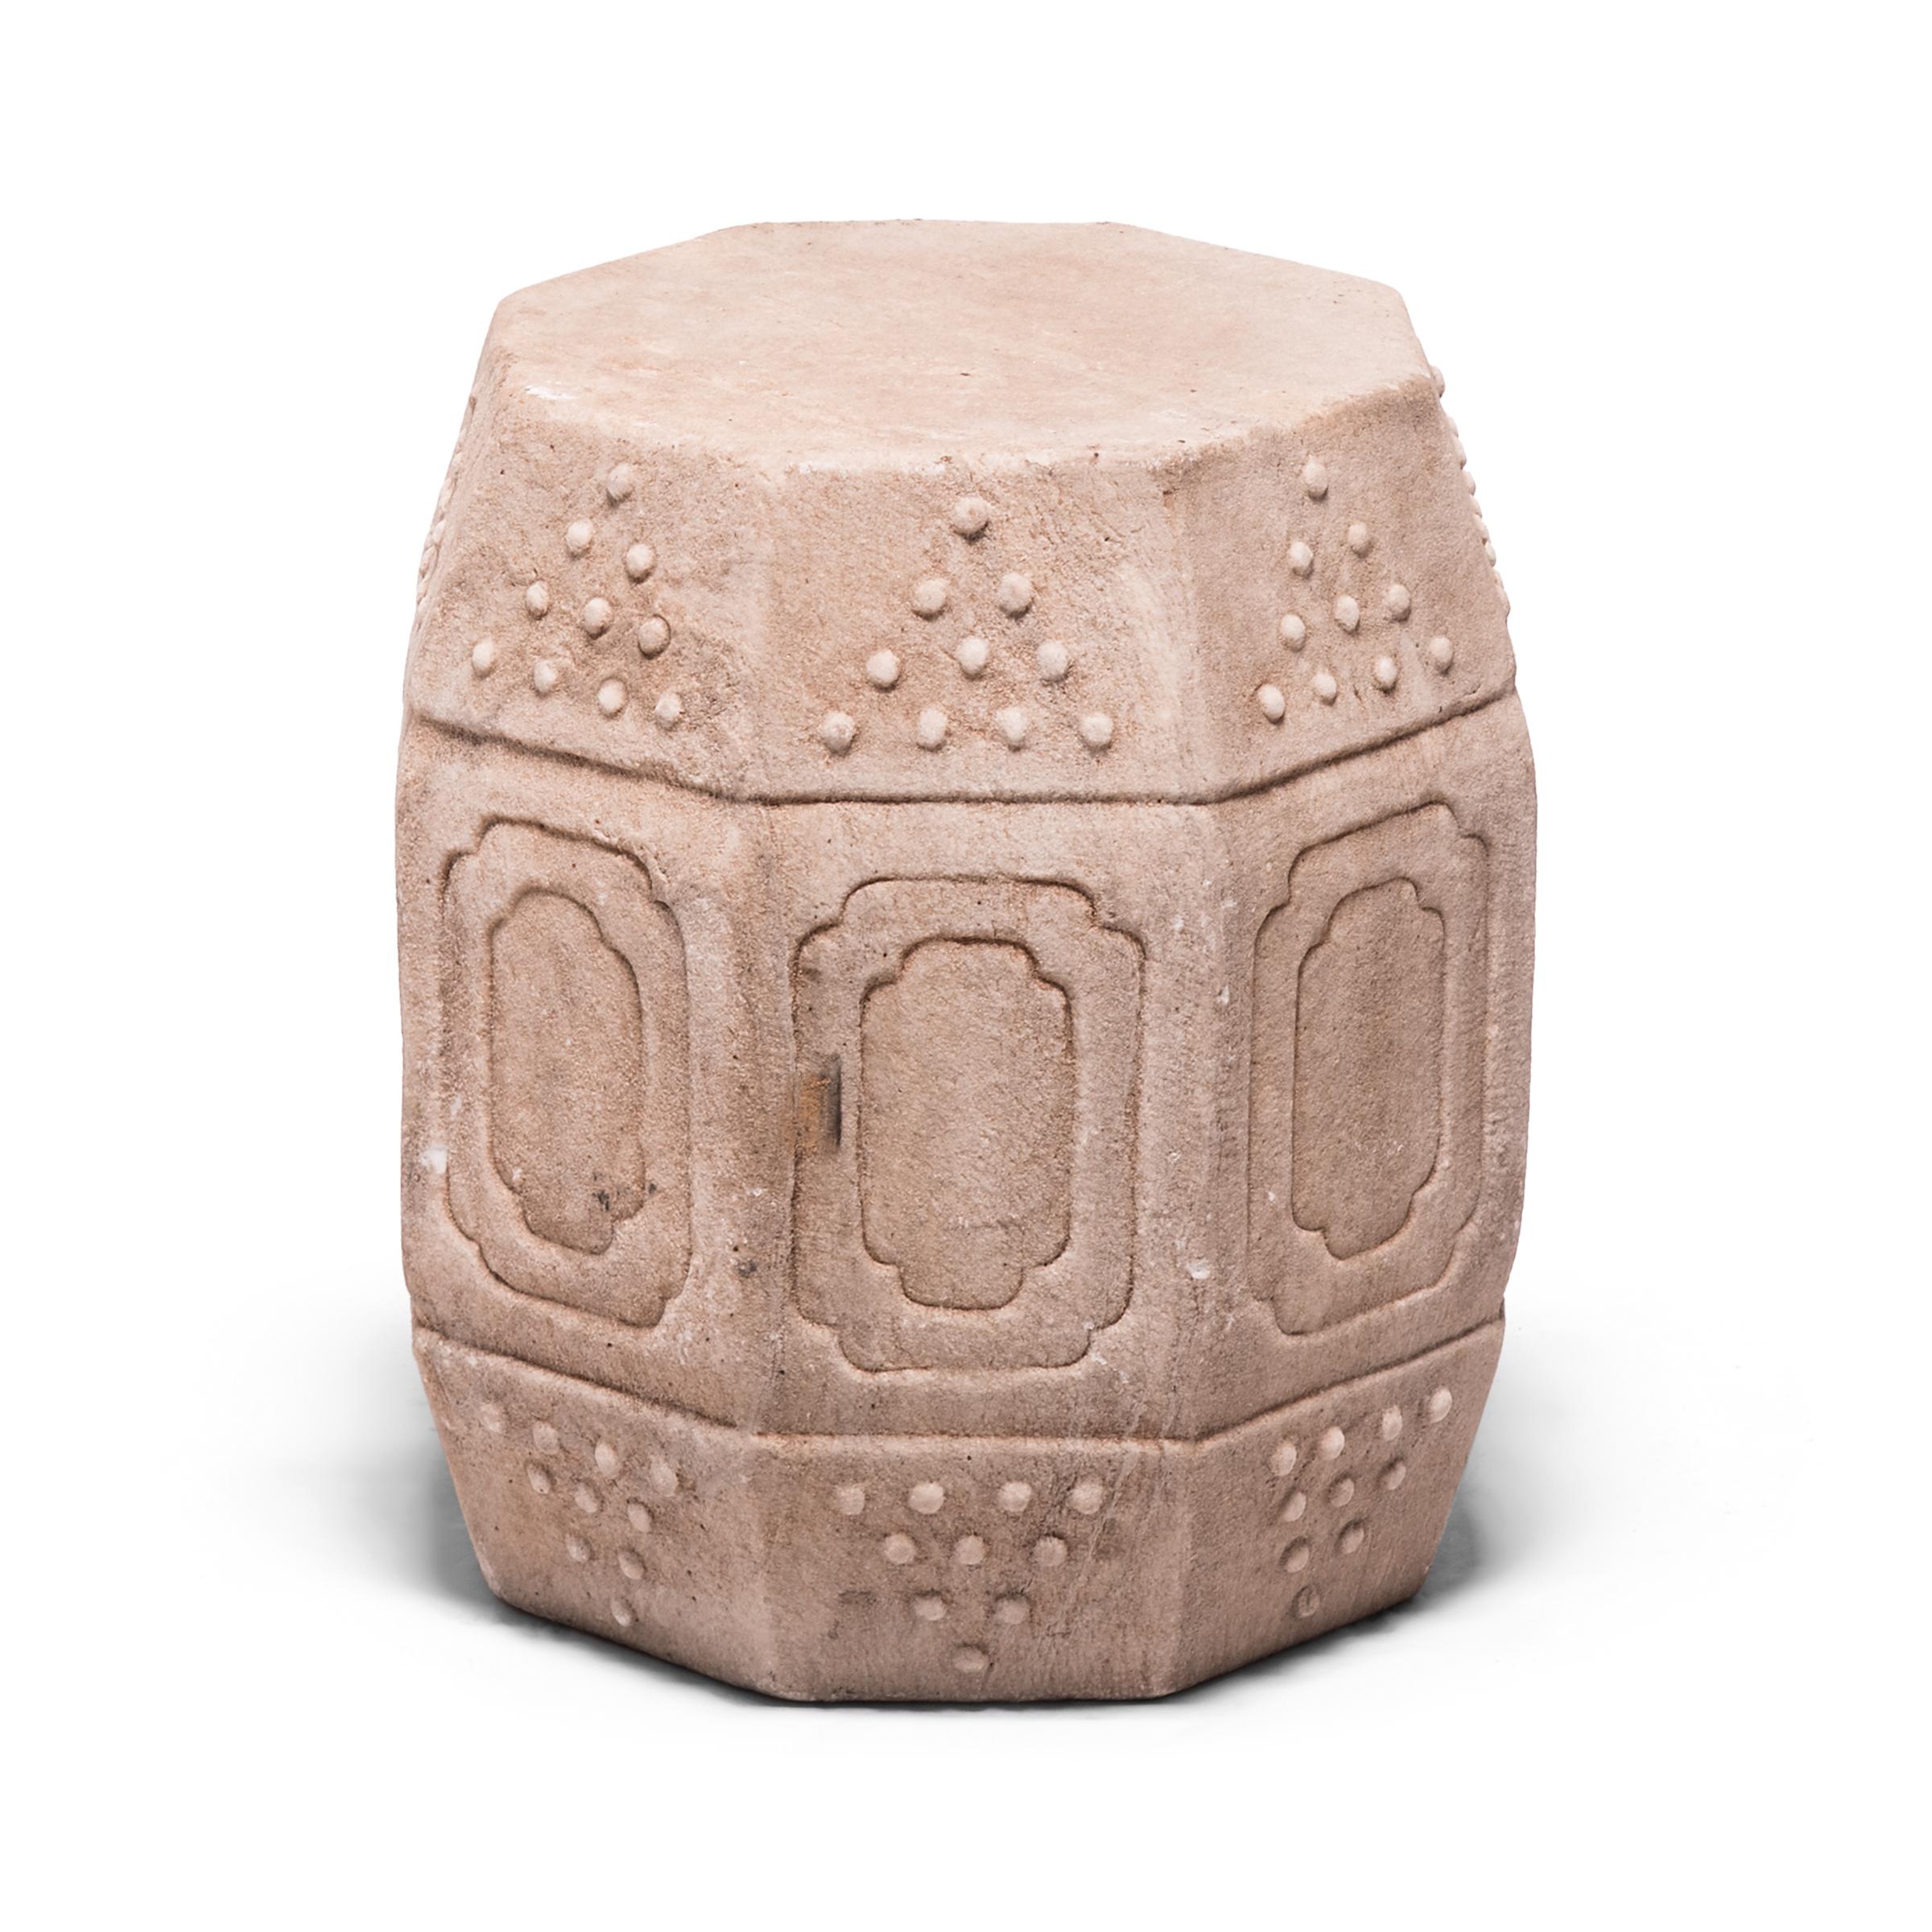 Hand carved of solid marble, this early 20th century drum-form stool has eight sides, an auspicious number symbolizing good fortune and prosperity. Each side is decorated with a simple yet effective design of nested cartouche panels and imitation